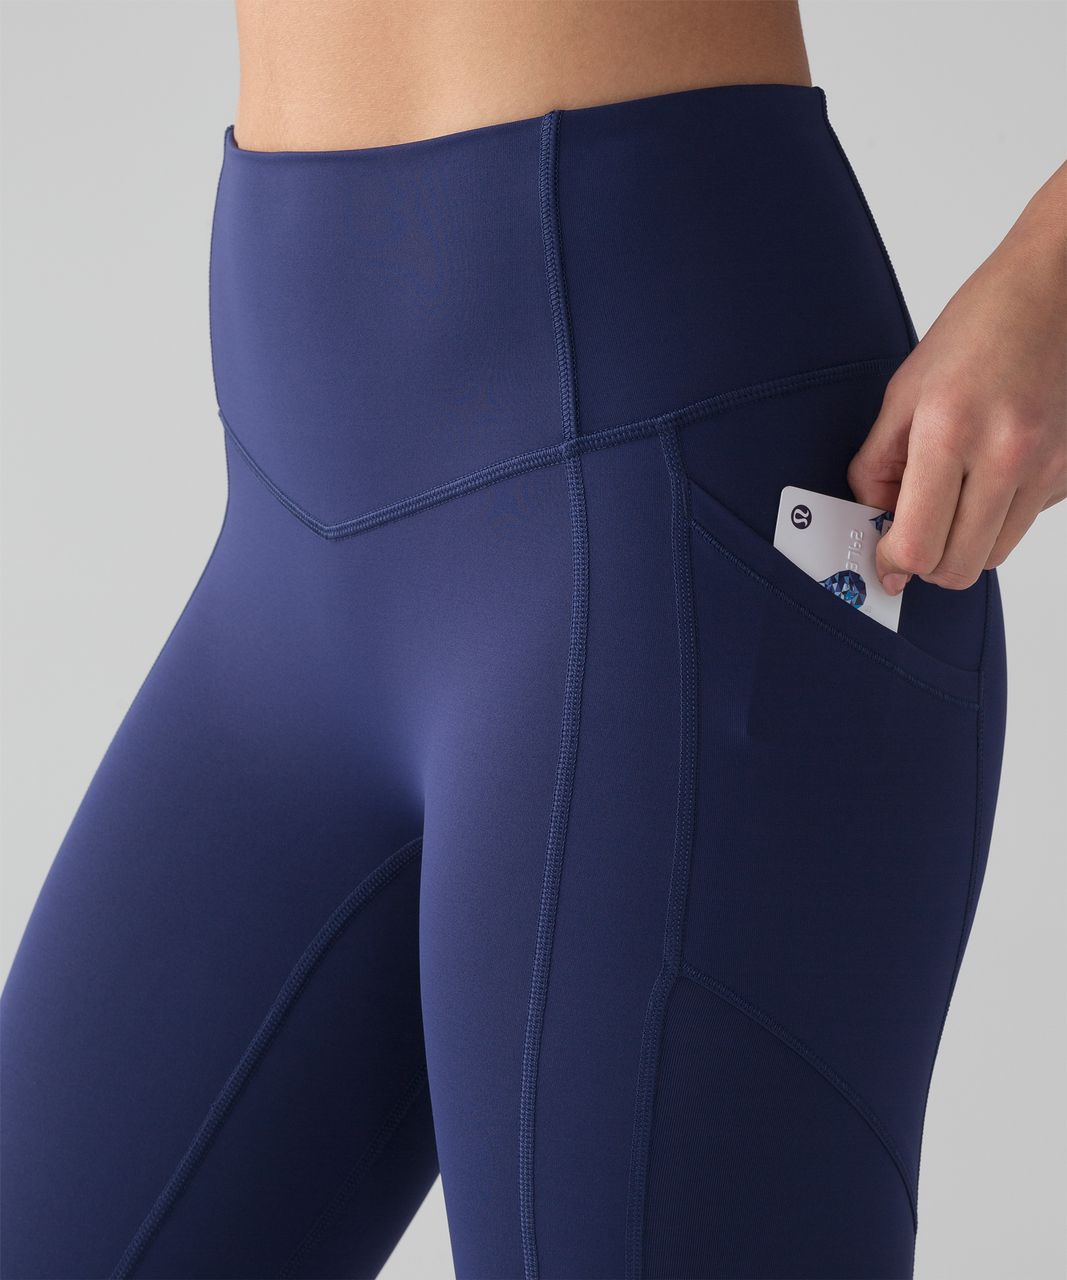 Lululemon All The Right Places Crop II *23" - Blueberry Jam